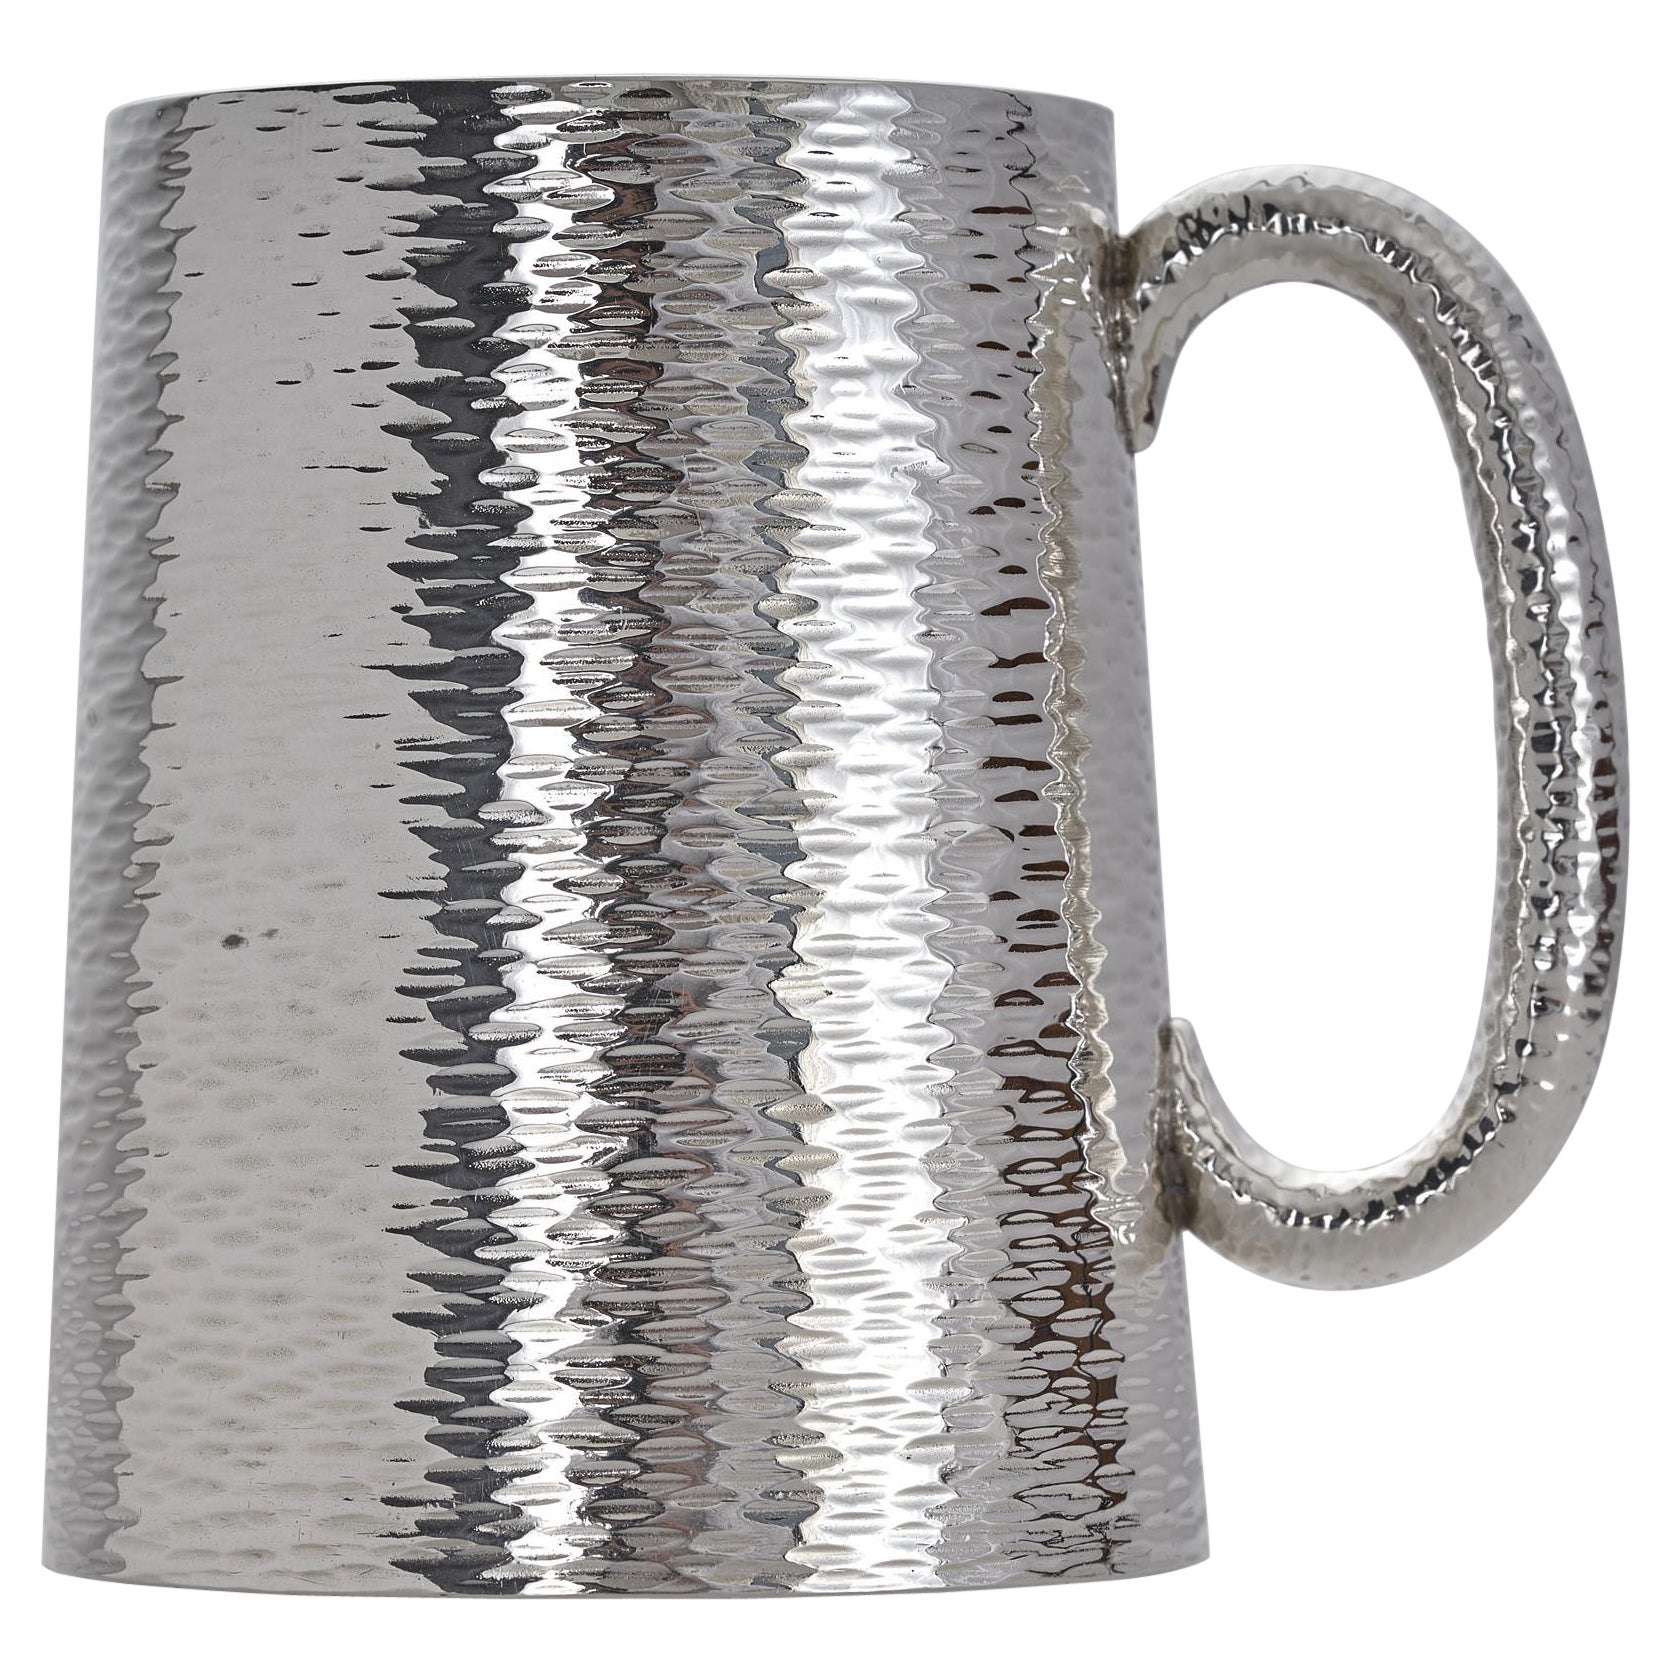 Hand-hammered Victorian silver child's mug For Sale